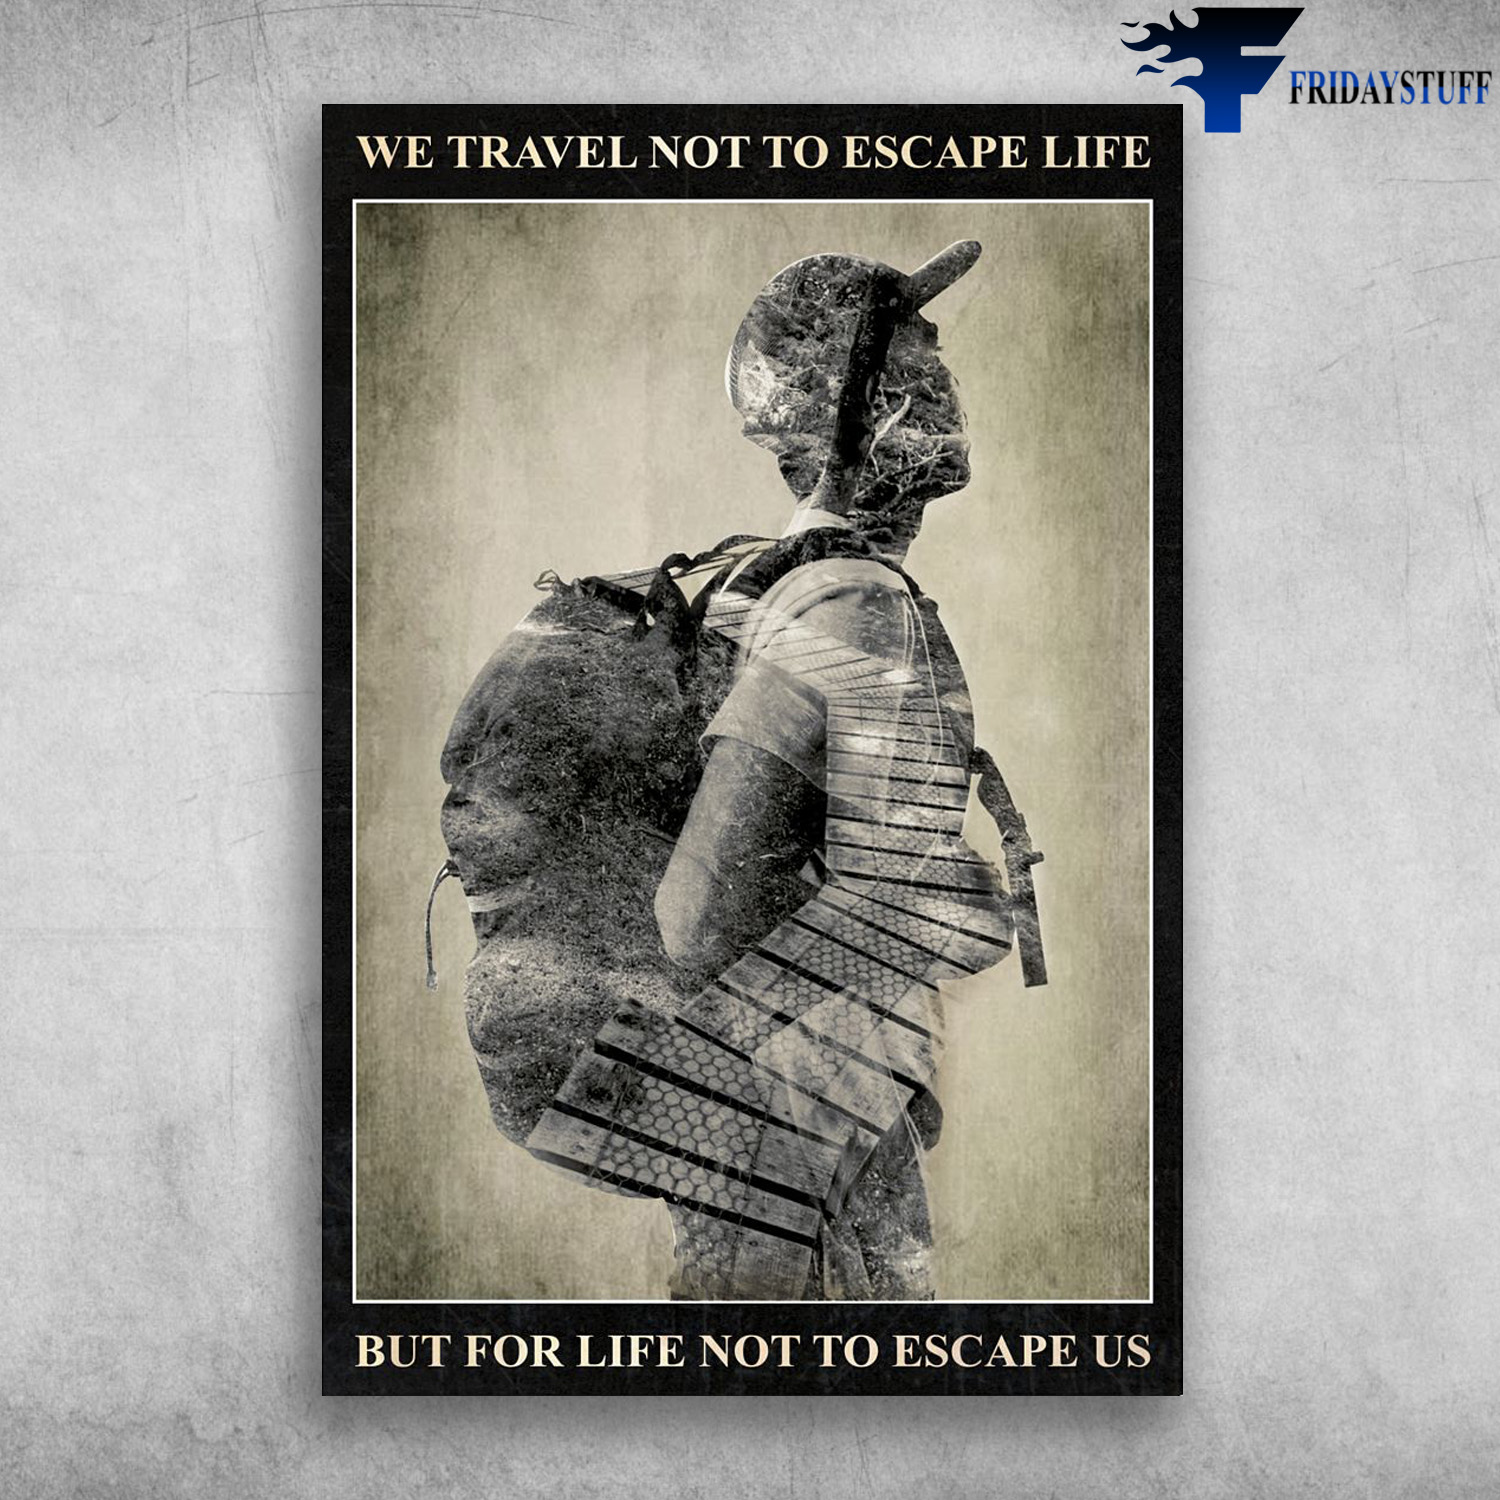 Man Traveling - We Travel Not To Escape Light, But For Life Not To Escape Us